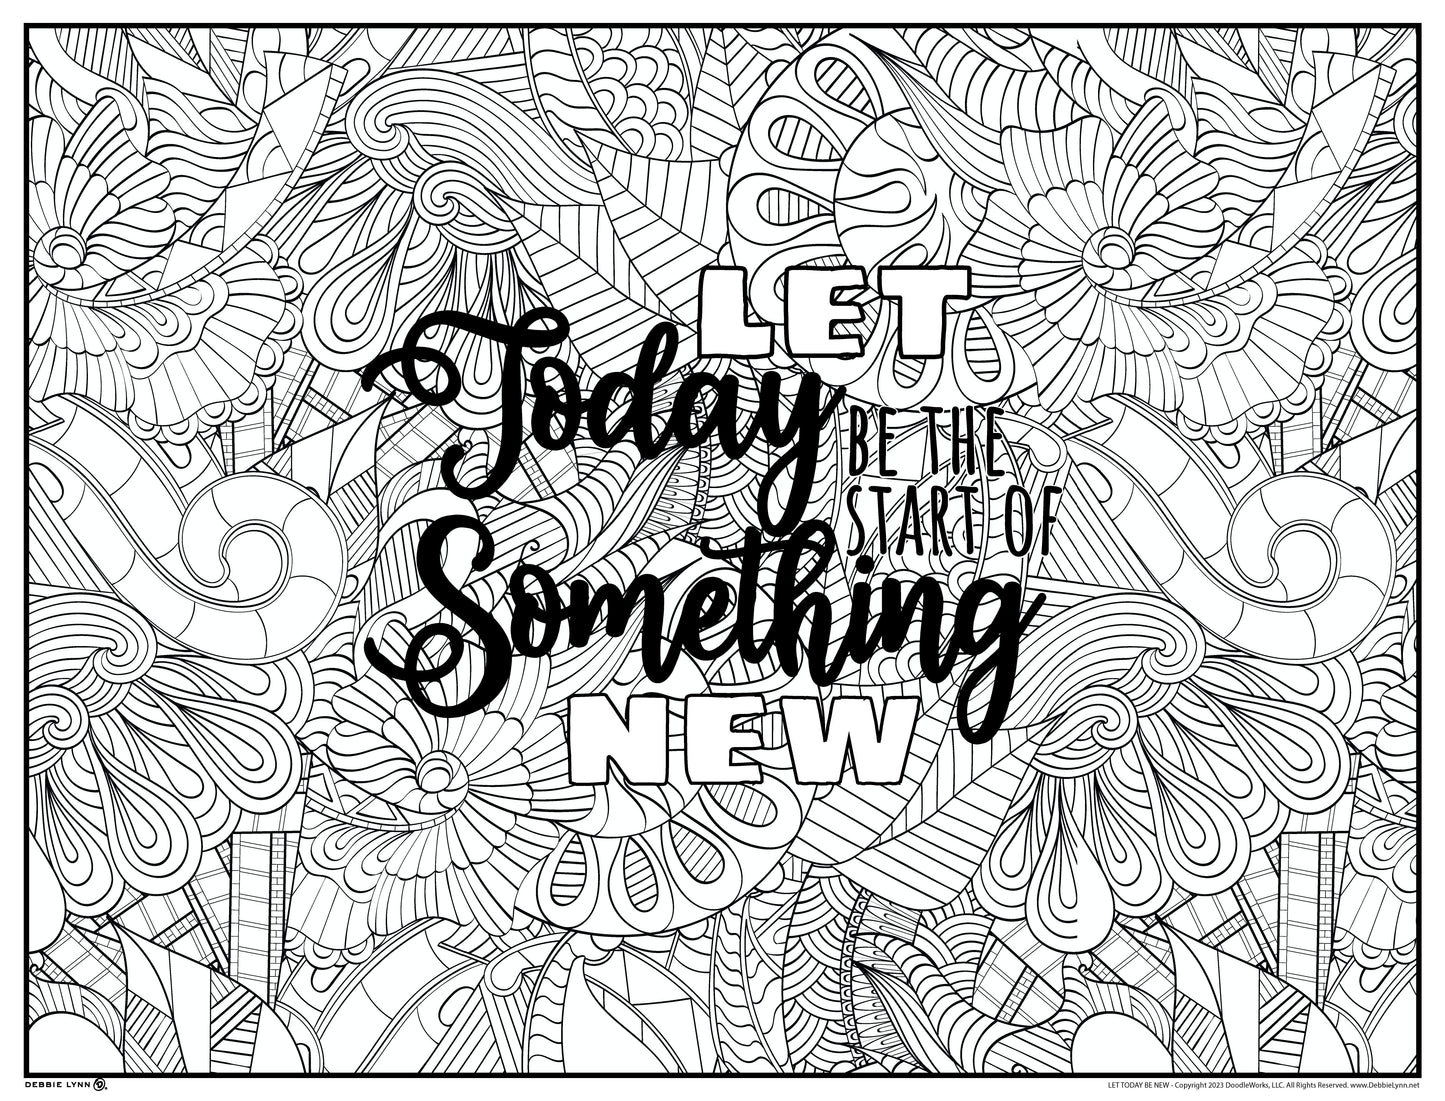 Let Today Be New Personalized Giant Coloring Poster 46"x60"